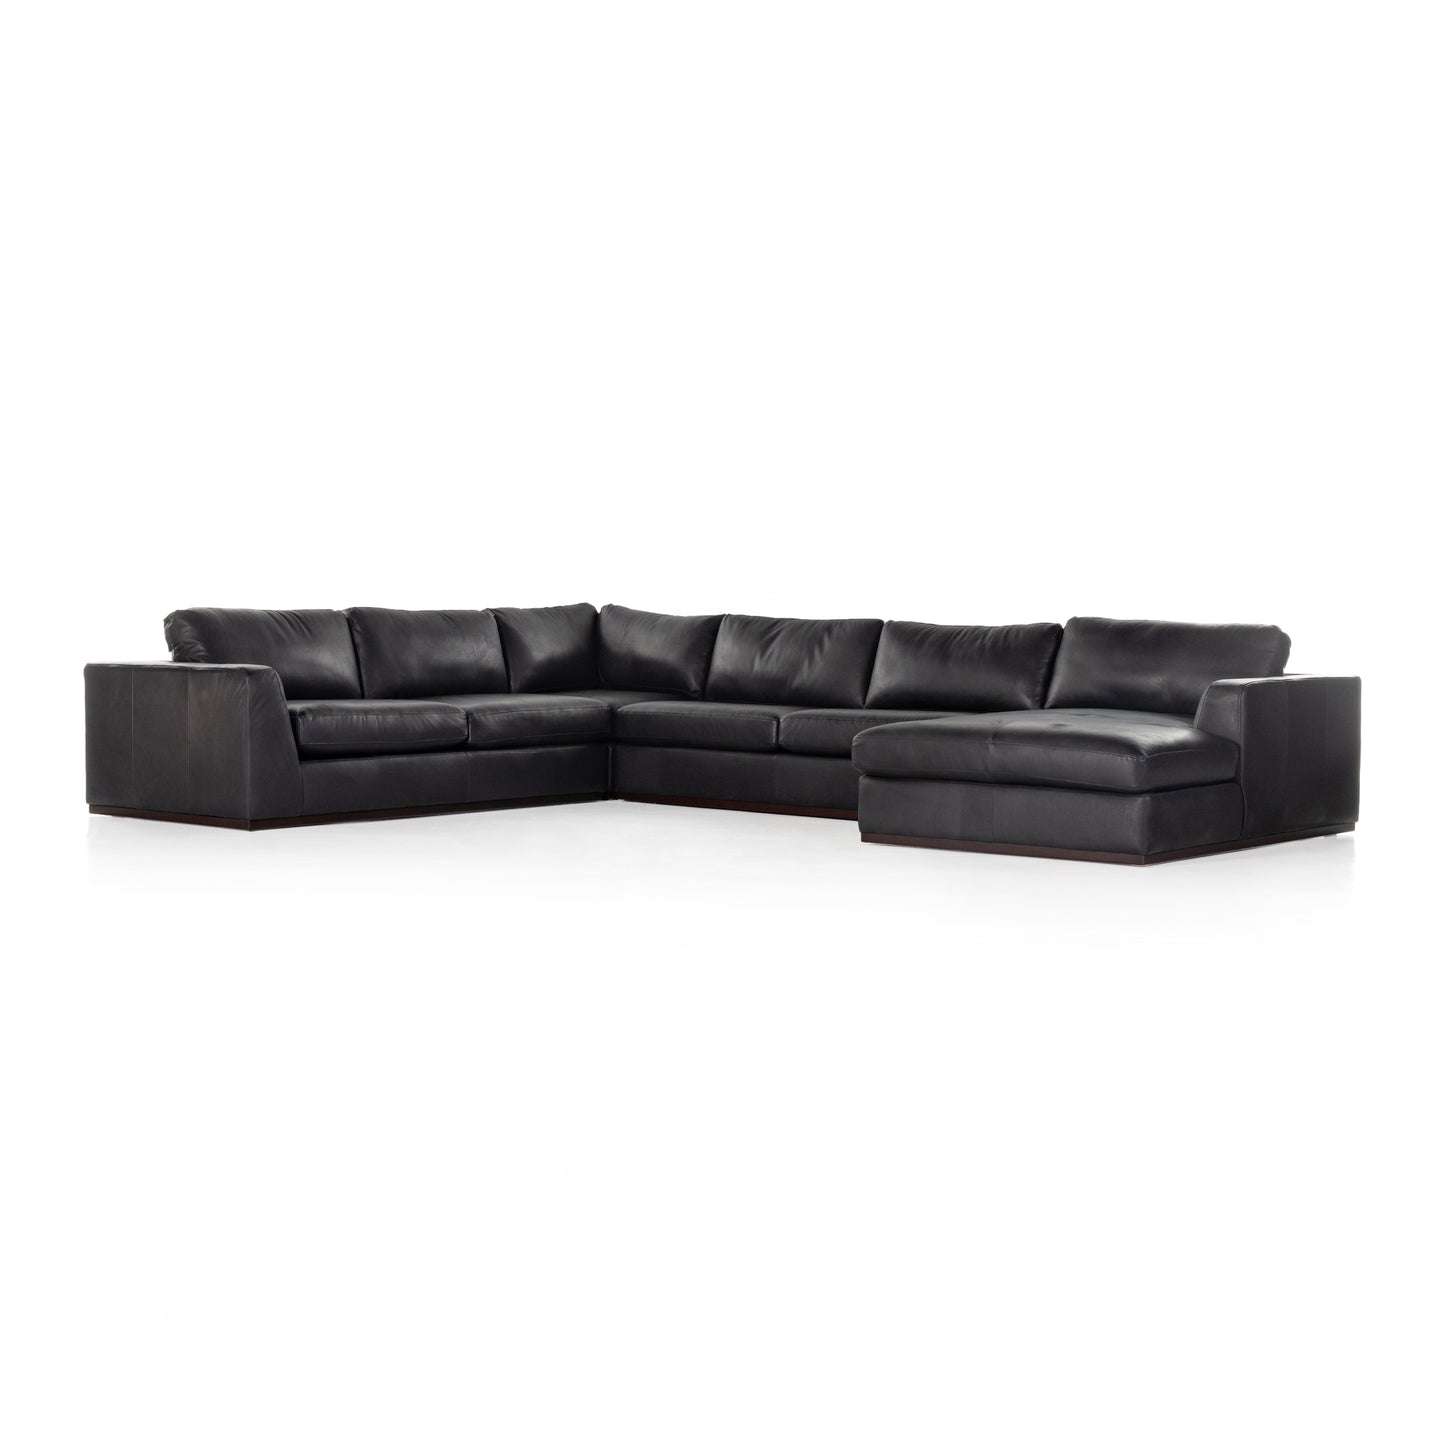 Load image into Gallery viewer, Colt 4-PC Sectional Heirloom Black / Right FacingSectional Four Hands  Heirloom Black Right Facing  Four Hands, Mid Century Modern Furniture, Old Bones Furniture Company, Old Bones Co, Modern Mid Century, Designer Furniture, https://www.oldbonesco.com/
